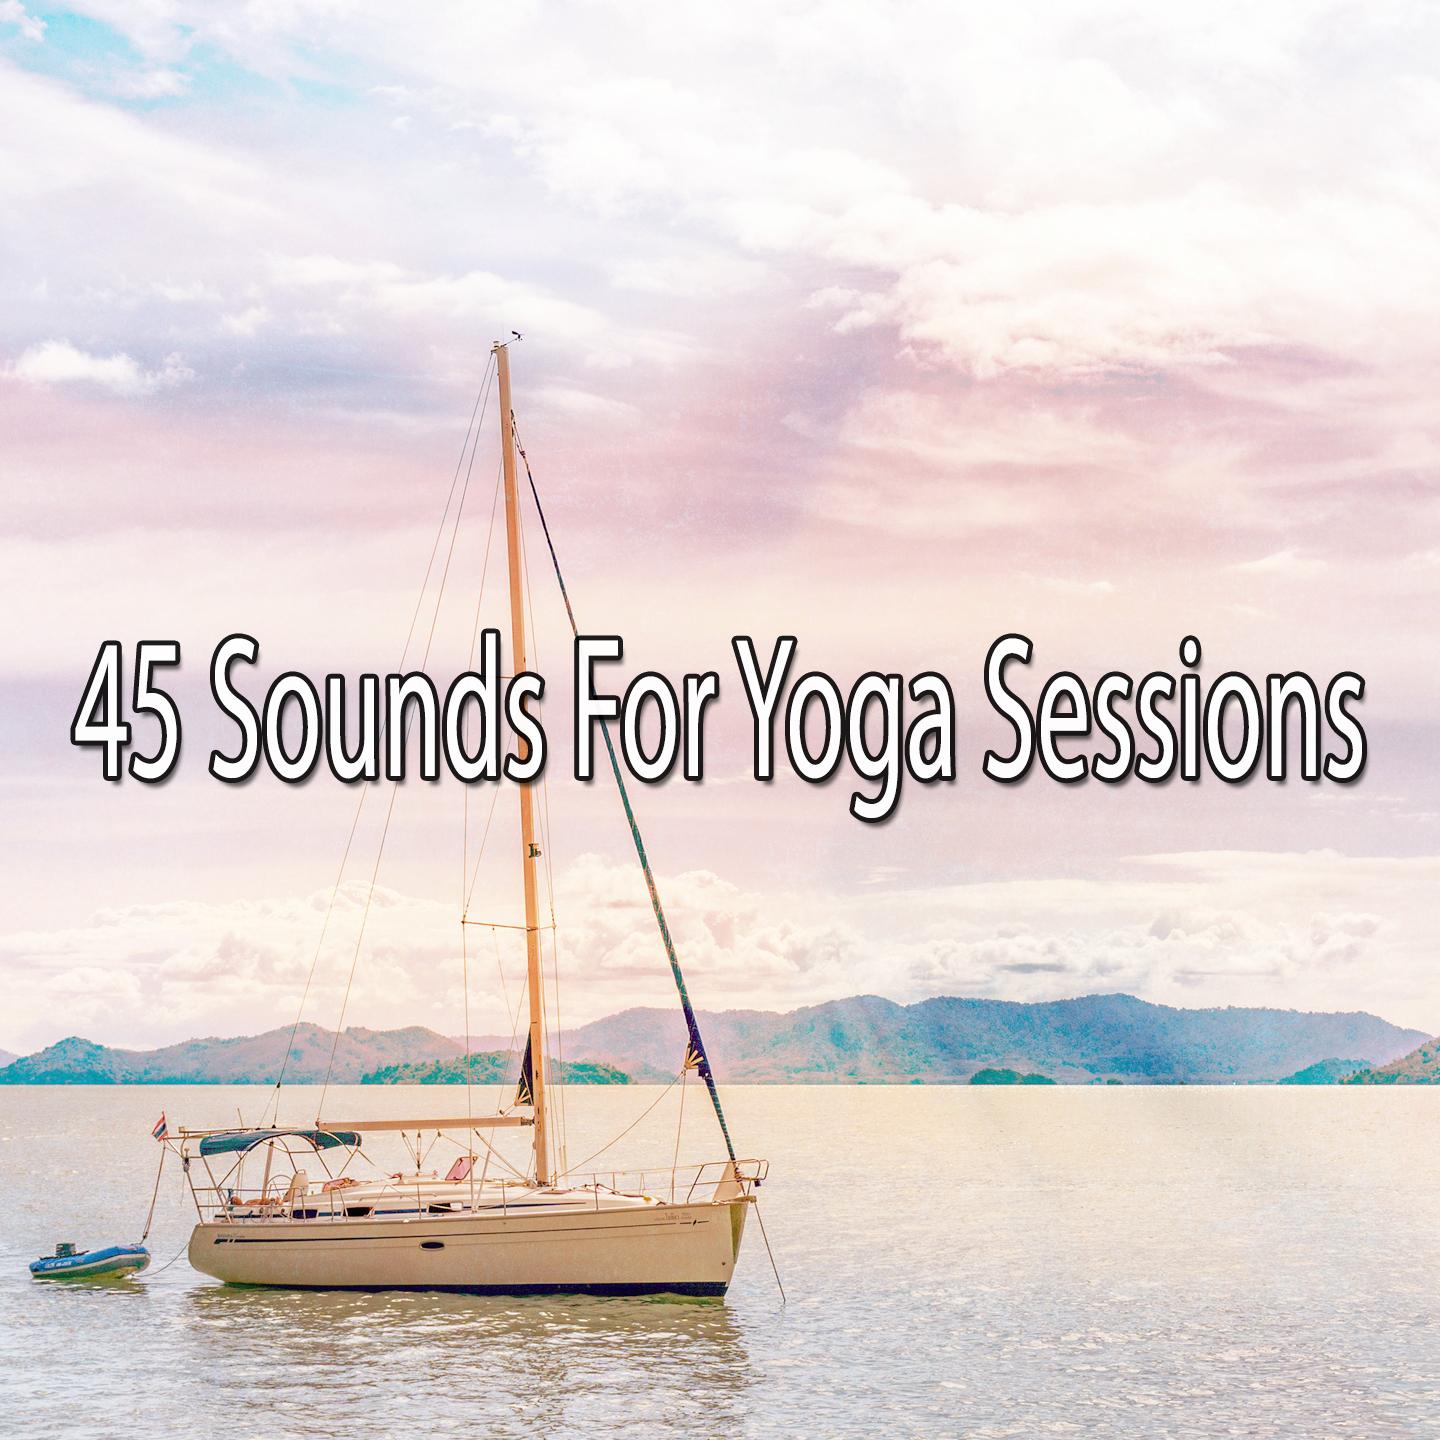 45 Sounds For Yoga Sessions